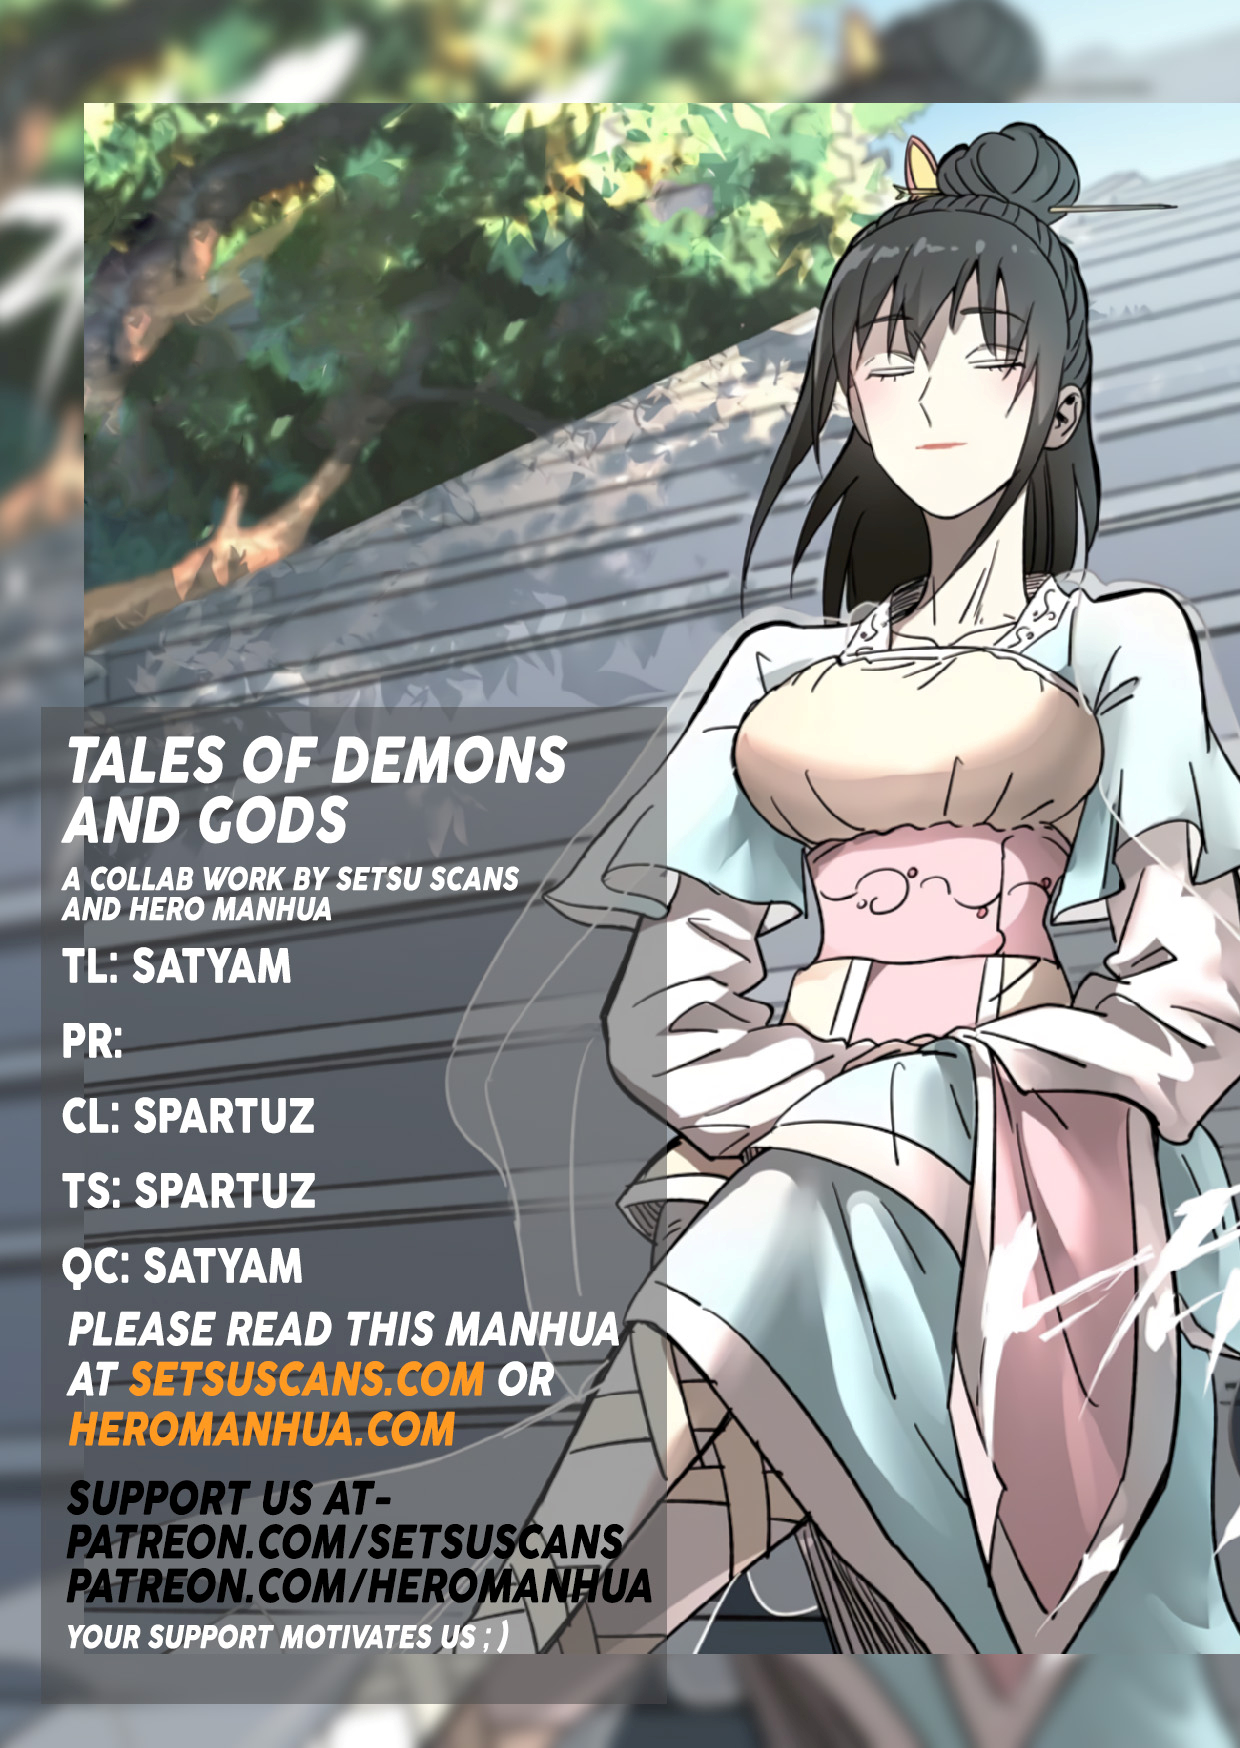 Tales of Demons and Gods - Chapter 10732 - Disgrace (1) - Image 1